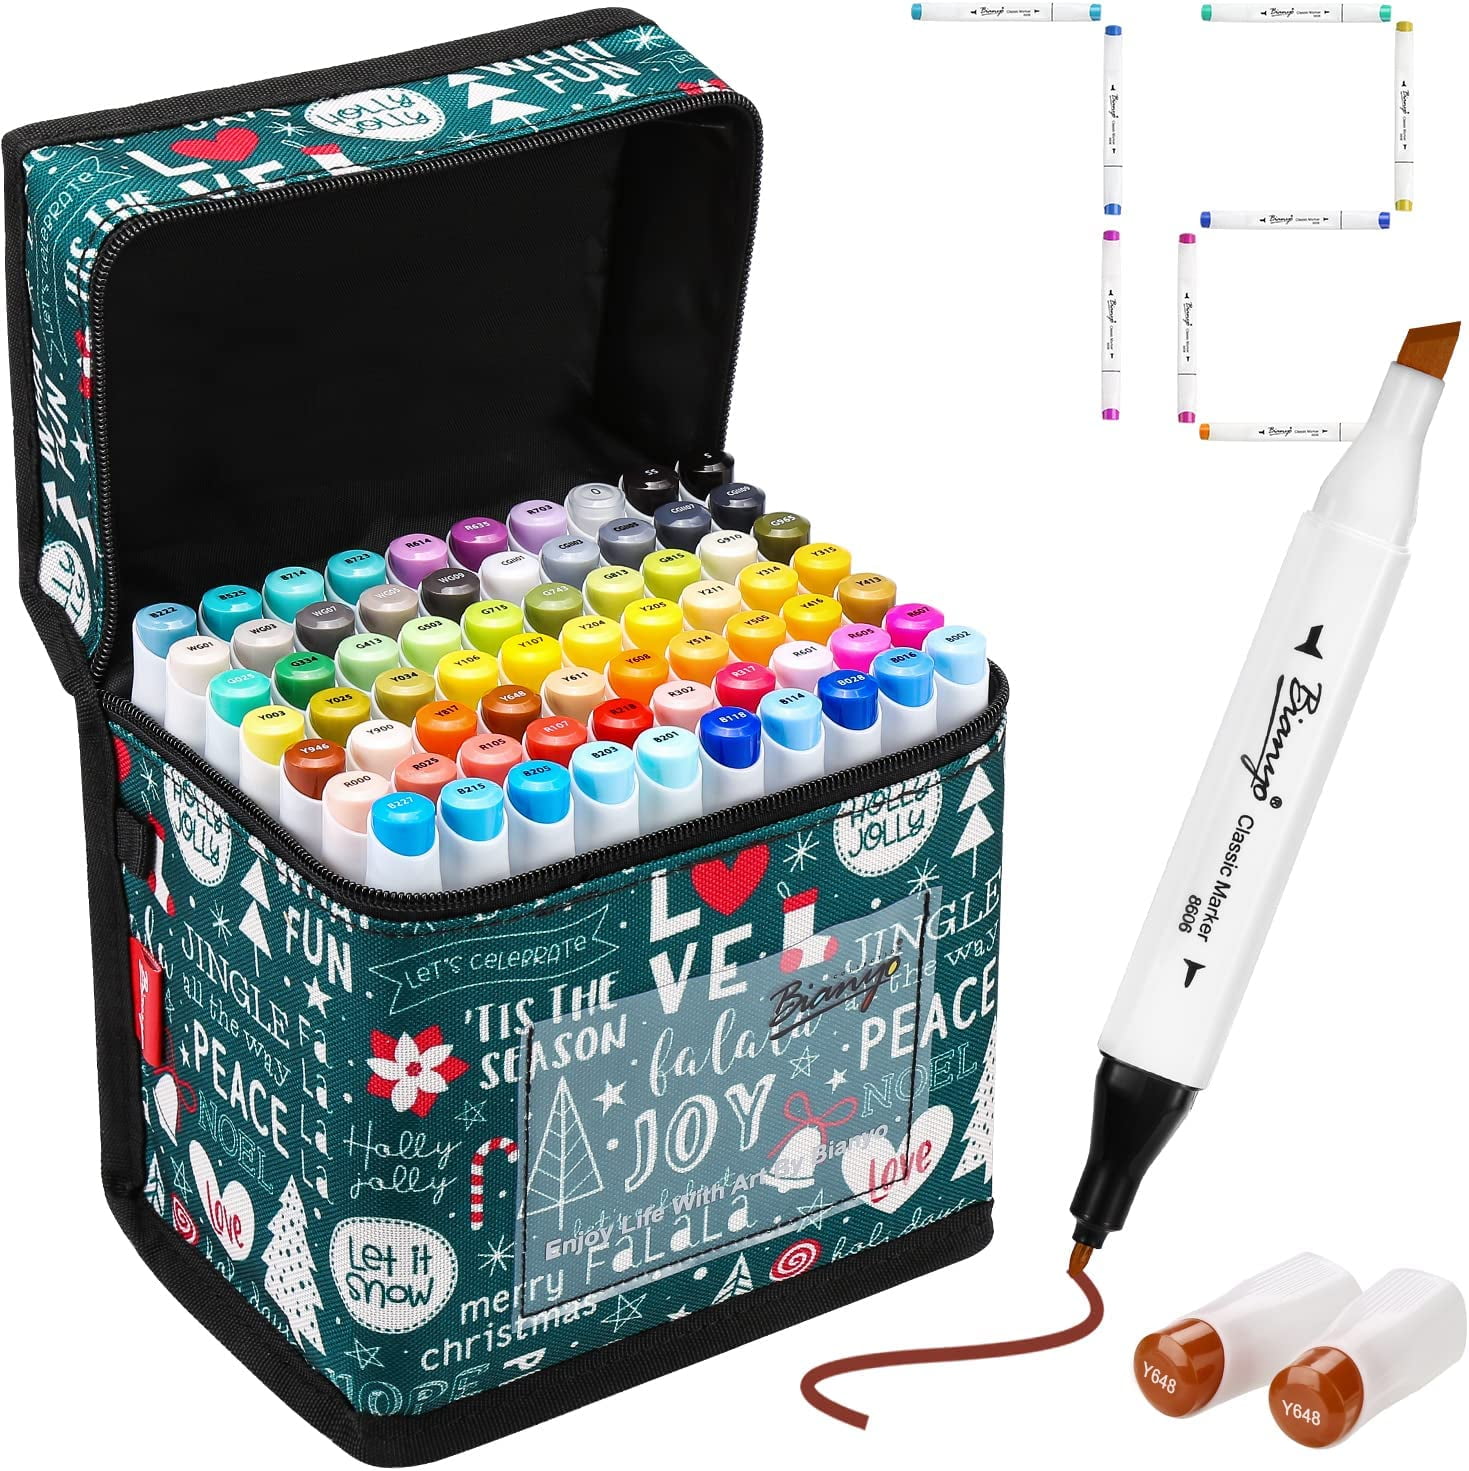 Bianyo 72 Primary Colors Alcohol-Based Dual Tip Bullet & Chisel Art Markers Set with Christmas Gift Bag, Other